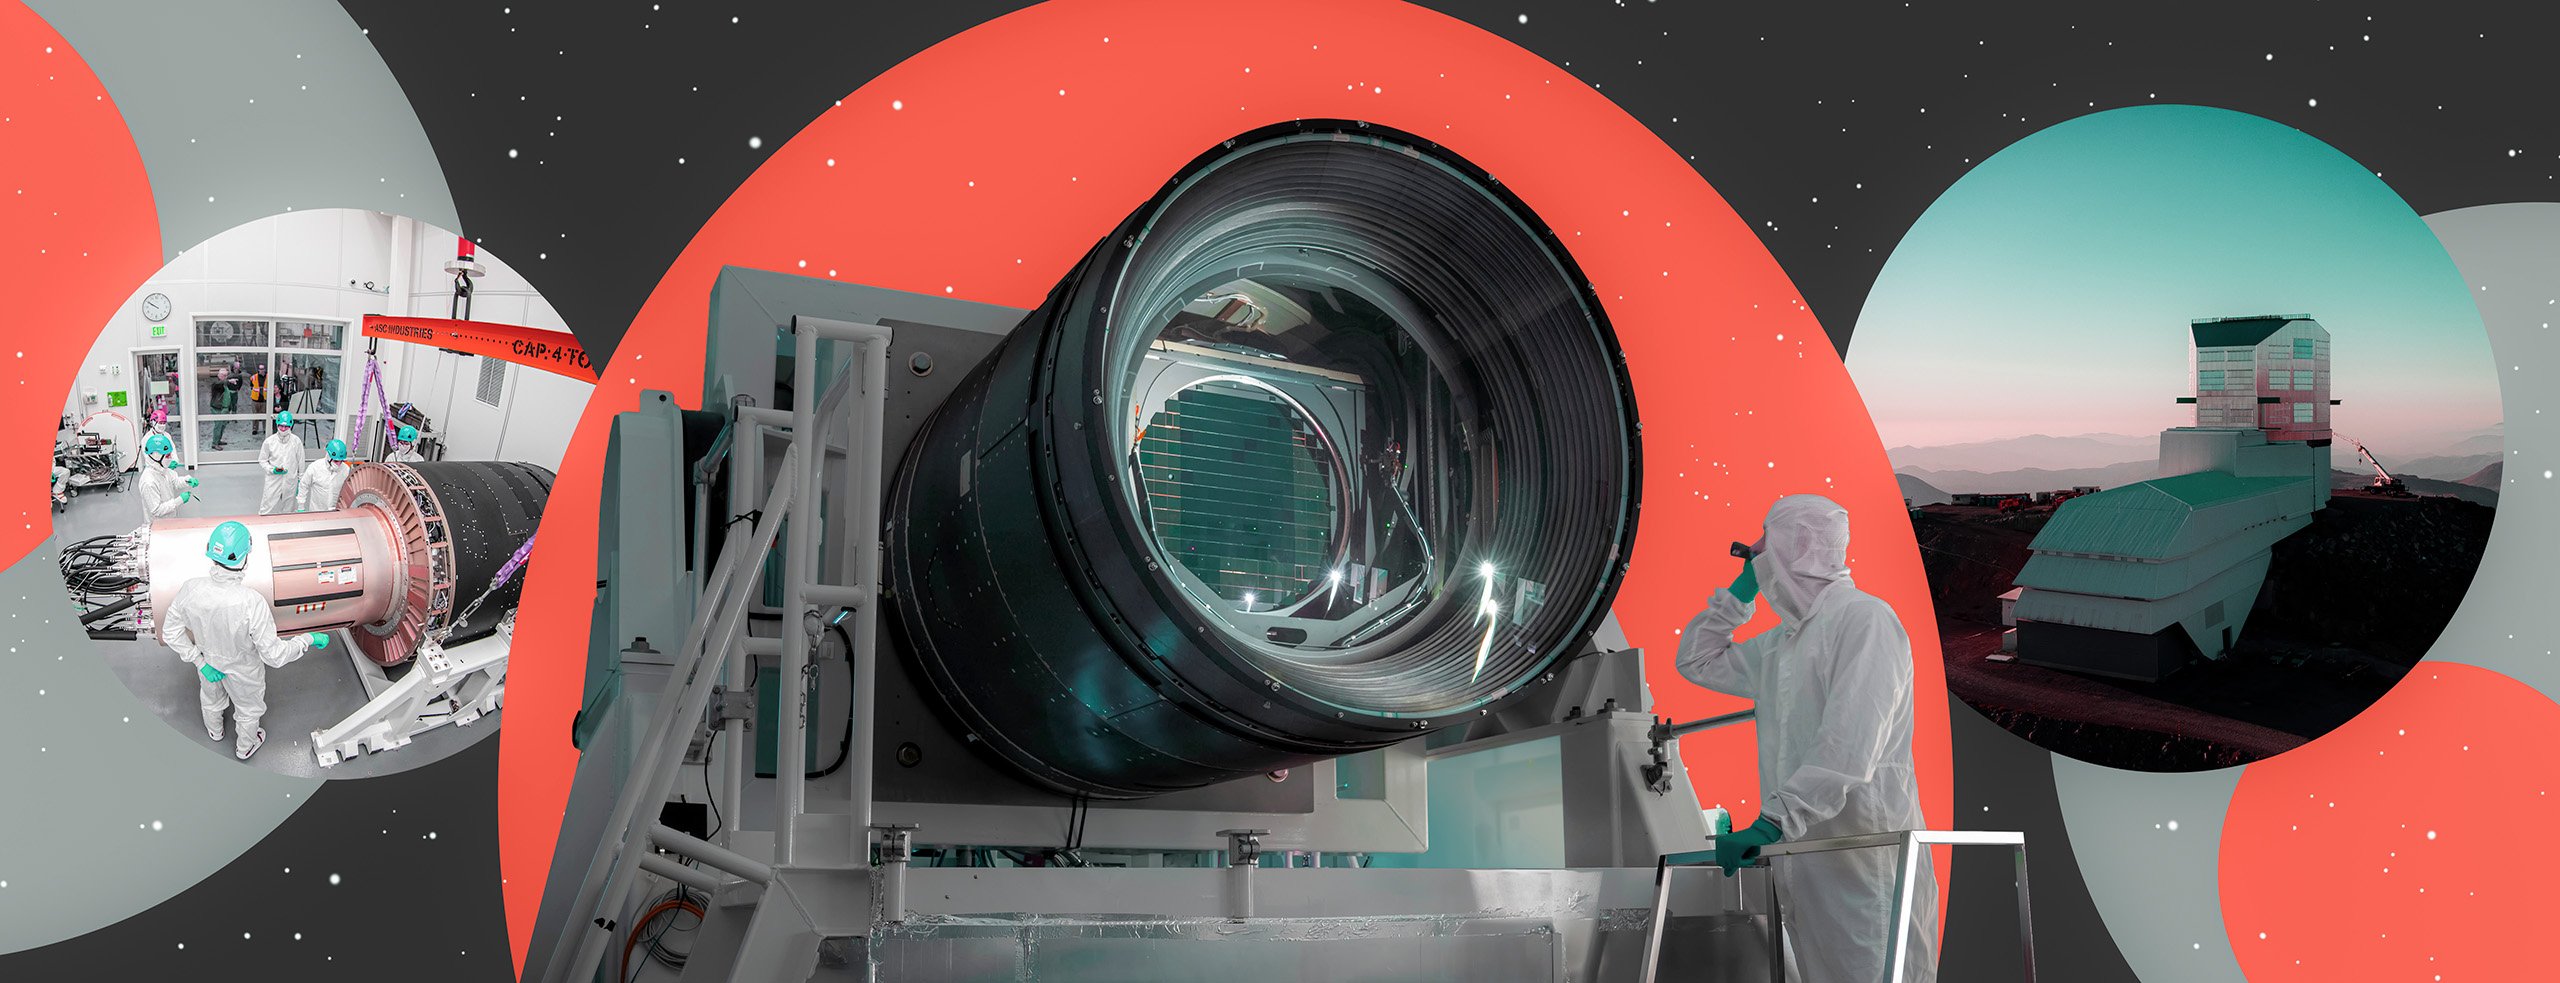 After 20 Years, the Construction of Astronomys Largest Digital Camera Has Finally Been Completed [Video]